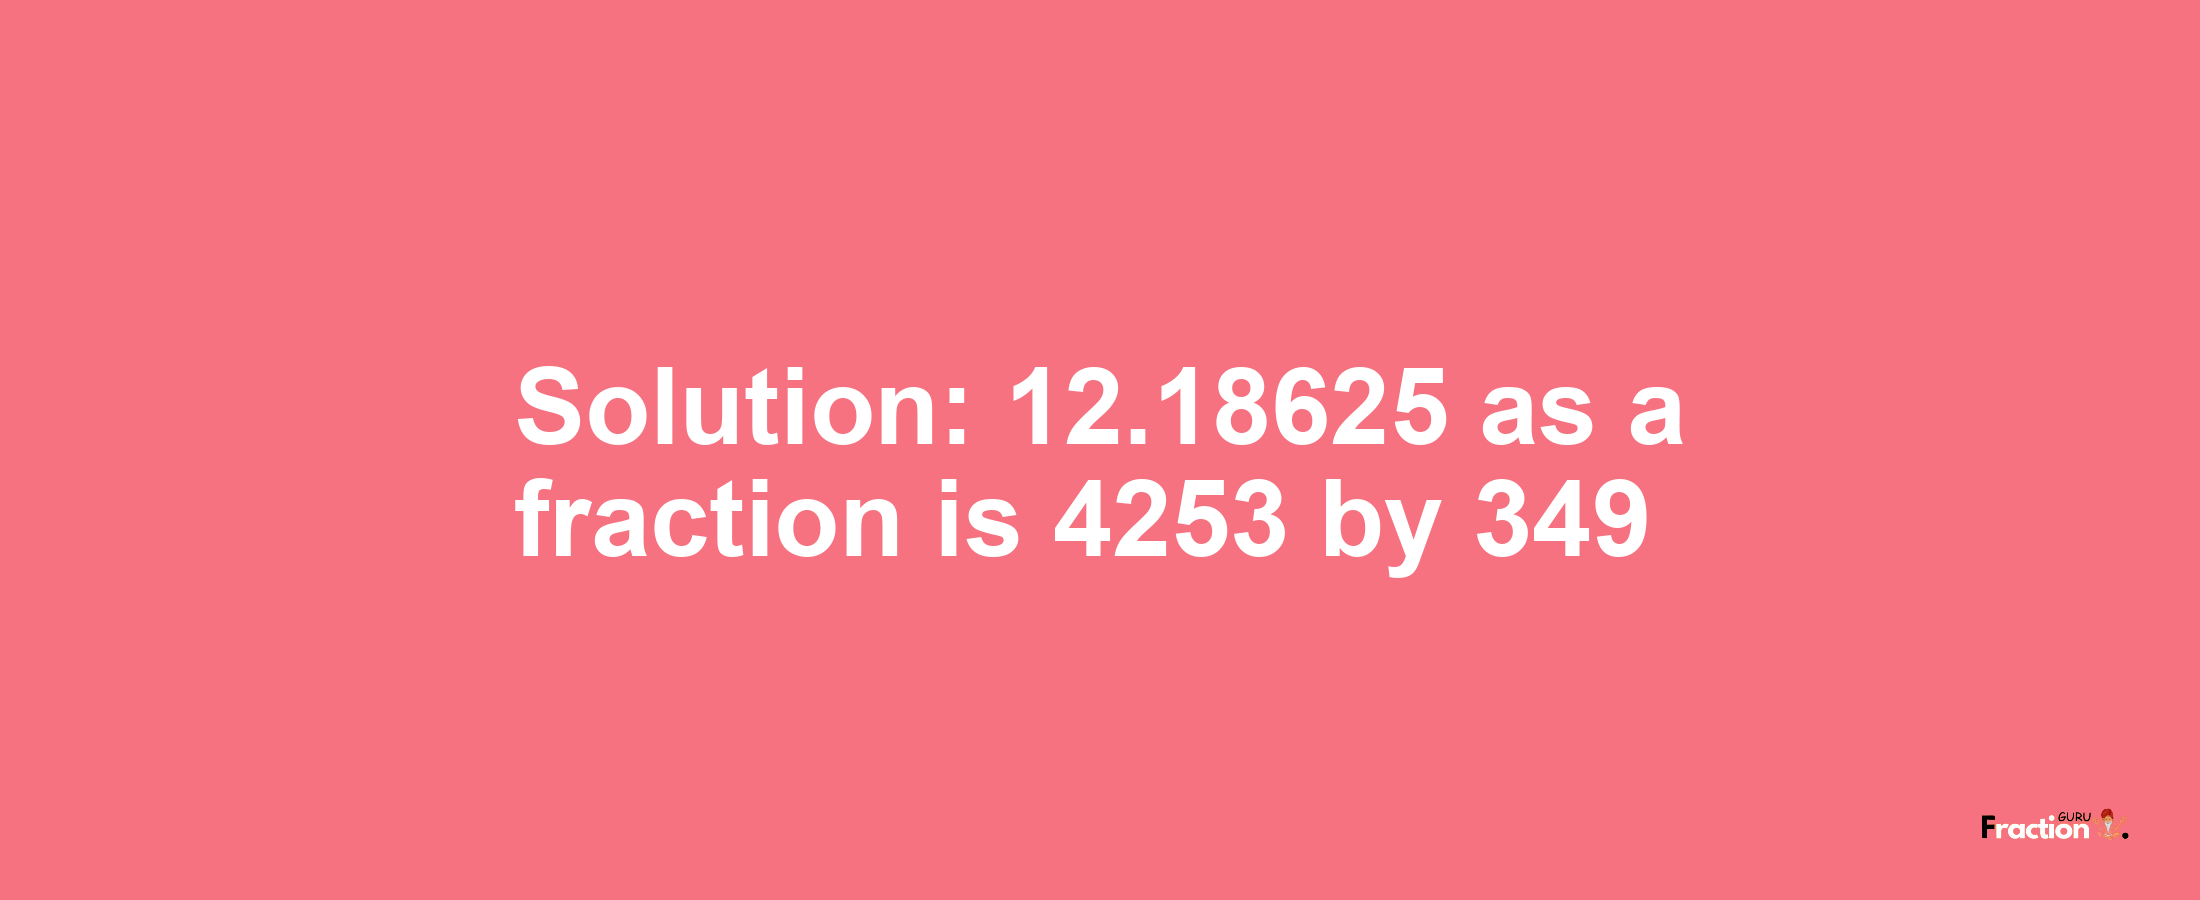 Solution:12.18625 as a fraction is 4253/349